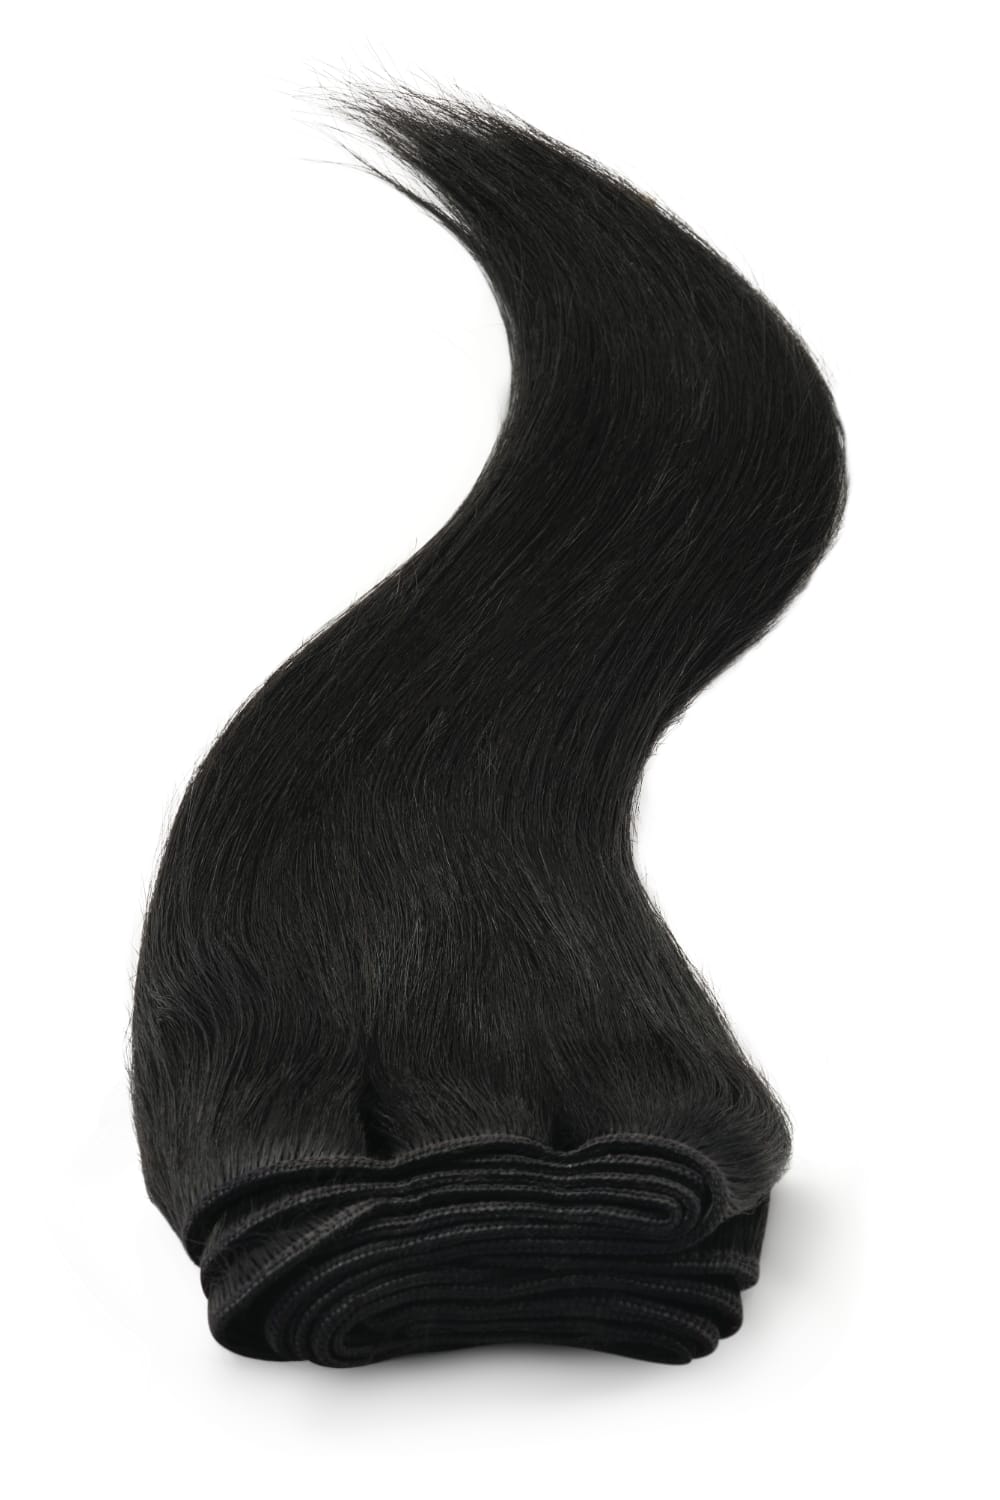 Yaki Silky Weave | Human Hair Extensions | 16 Inch | Jet Black (1) - Beauty Hair Products LtdHair Extensions